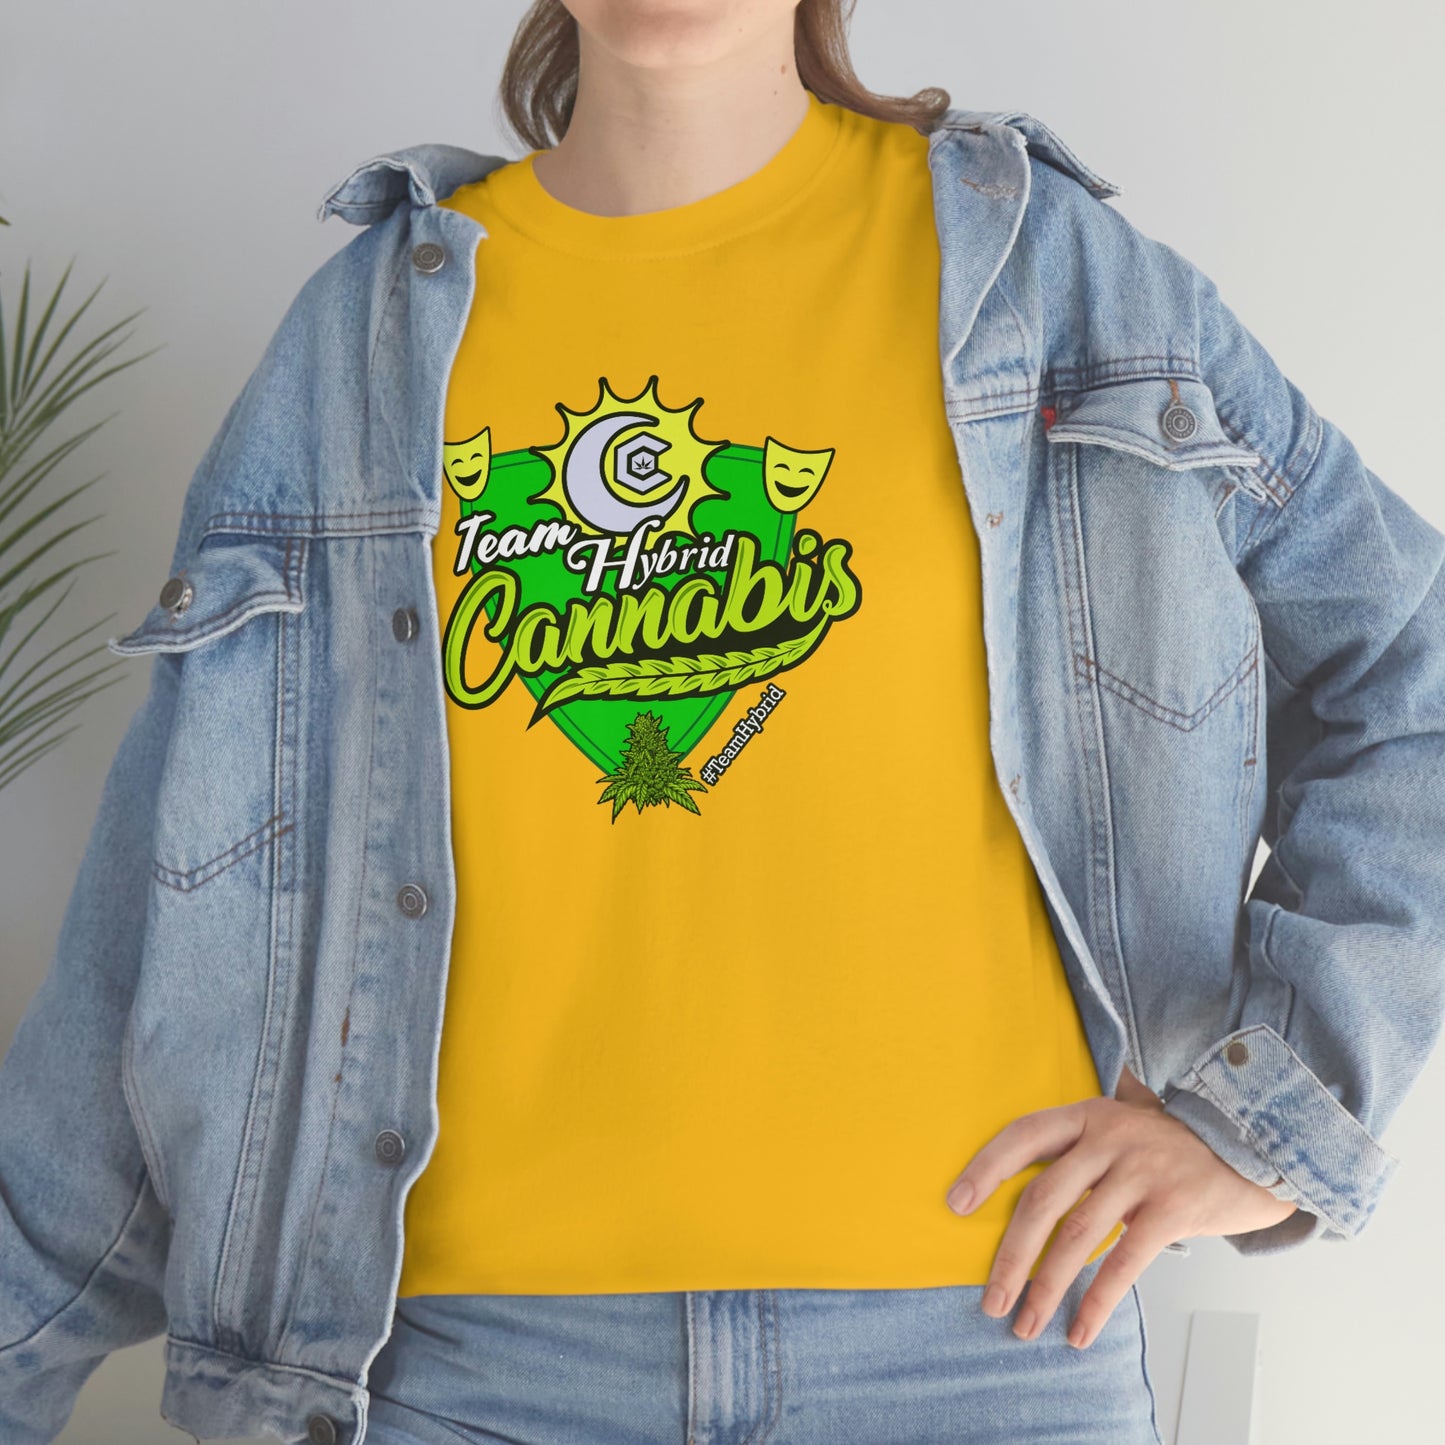 a woman wearing a yellow Team Hybrid Cannabis T-Shirt and jeans.